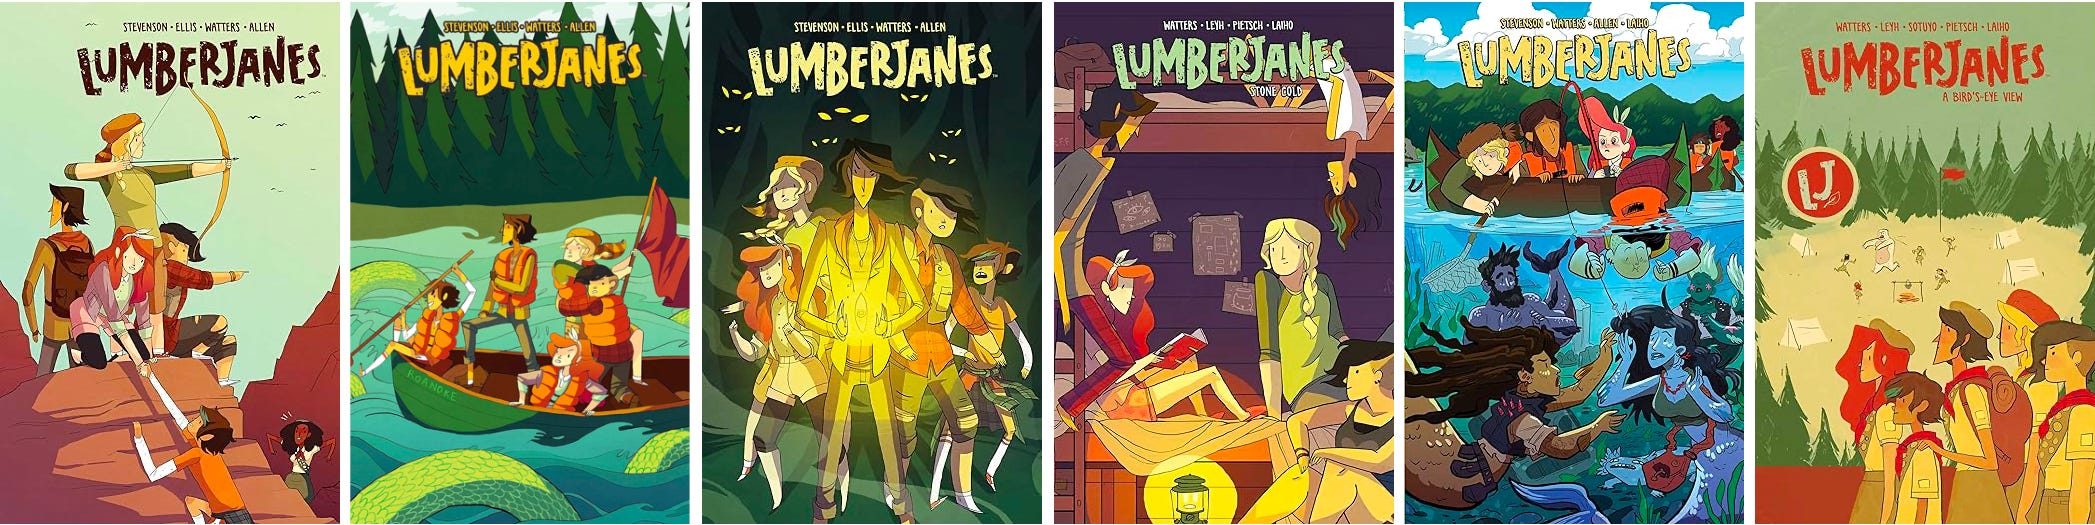 Covers from a few of the lumberjanes comics